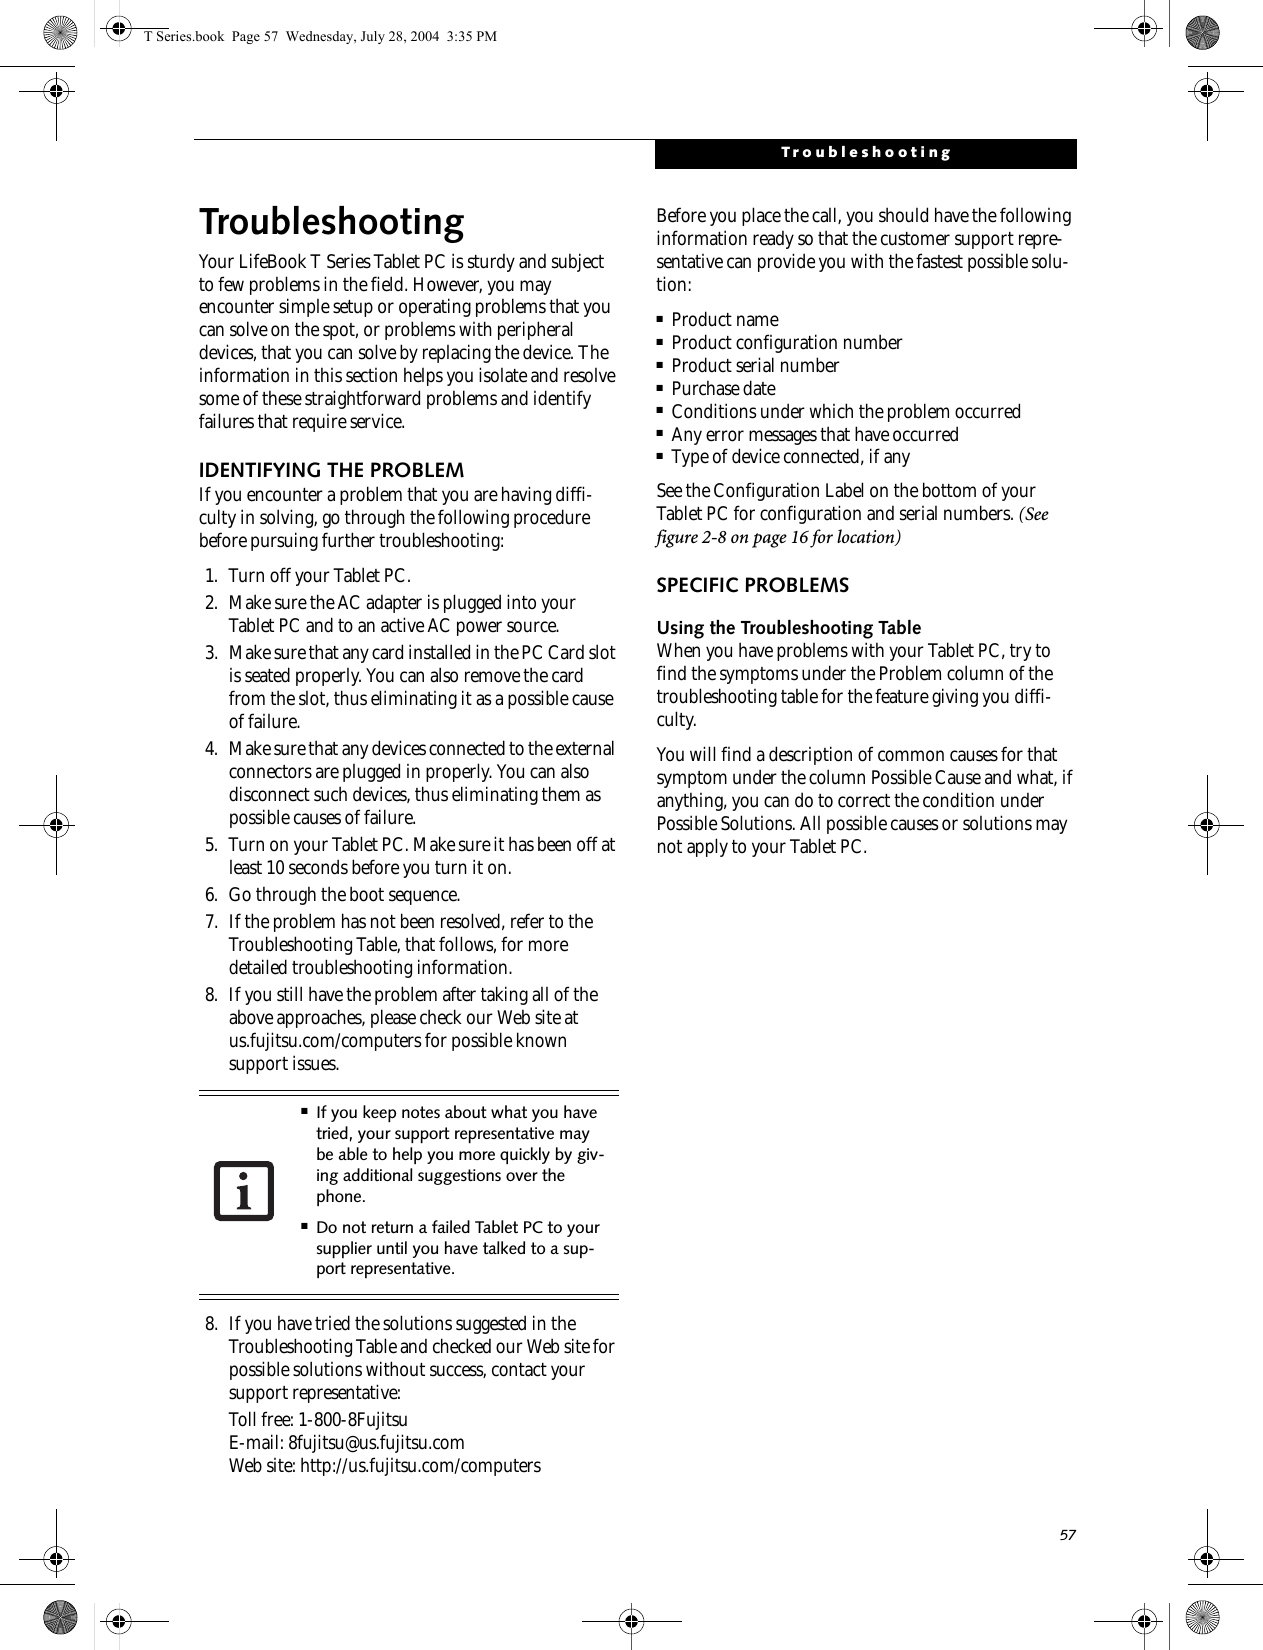 57TroubleshootingTroubleshootingYour LifeBook T Series Tablet PC is sturdy and subject to few problems in the field. However, you may encounter simple setup or operating problems that you can solve on the spot, or problems with peripheral devices, that you can solve by replacing the device. The information in this section helps you isolate and resolve some of these straightforward problems and identify failures that require service.IDENTIFYING THE PROBLEMIf you encounter a problem that you are having diffi-culty in solving, go through the following procedure before pursuing further troubleshooting:1. Turn off your Tablet PC.2. Make sure the AC adapter is plugged into your Tablet PC and to an active AC power source.3. Make sure that any card installed in the PC Card slot is seated properly. You can also remove the card from the slot, thus eliminating it as a possible cause of failure.4. Make sure that any devices connected to the external connectors are plugged in properly. You can also disconnect such devices, thus eliminating them as possible causes of failure.5. Turn on your Tablet PC. Make sure it has been off at least 10 seconds before you turn it on.6. Go through the boot sequence.7. If the problem has not been resolved, refer to the Troubleshooting Table, that follows, for more detailed troubleshooting information.8. If you still have the problem after taking all of the above approaches, please check our Web site at us.fujitsu.com/computers for possible known support issues. 8. If you have tried the solutions suggested in the Troubleshooting Table and checked our Web site for possible solutions without success, contact your support representative: Toll free: 1-800-8Fujitsu E-mail: 8fujitsu@us.fujitsu.comWeb site: http://us.fujitsu.com/computersBefore you place the call, you should have the following information ready so that the customer support repre-sentative can provide you with the fastest possible solu-tion:■Product name■Product configuration number■Product serial number■Purchase date■Conditions under which the problem occurred■Any error messages that have occurred■Type of device connected, if anySee the Configuration Label on the bottom of yourTablet PC for configuration and serial numbers. (See figure 2-8 on page 16 for location)SPECIFIC PROBLEMSUsing the Troubleshooting TableWhen you have problems with your Tablet PC, try to find the symptoms under the Problem column of the troubleshooting table for the feature giving you diffi-culty. You will find a description of common causes for that symptom under the column Possible Cause and what, if anything, you can do to correct the condition under Possible Solutions. All possible causes or solutions may not apply to your Tablet PC.■If you keep notes about what you have tried, your support representative may be able to help you more quickly by giv-ing additional suggestions over the phone.■Do not return a failed Tablet PC to your supplier until you have talked to a sup-port representative.T Series.book  Page 57  Wednesday, July 28, 2004  3:35 PM